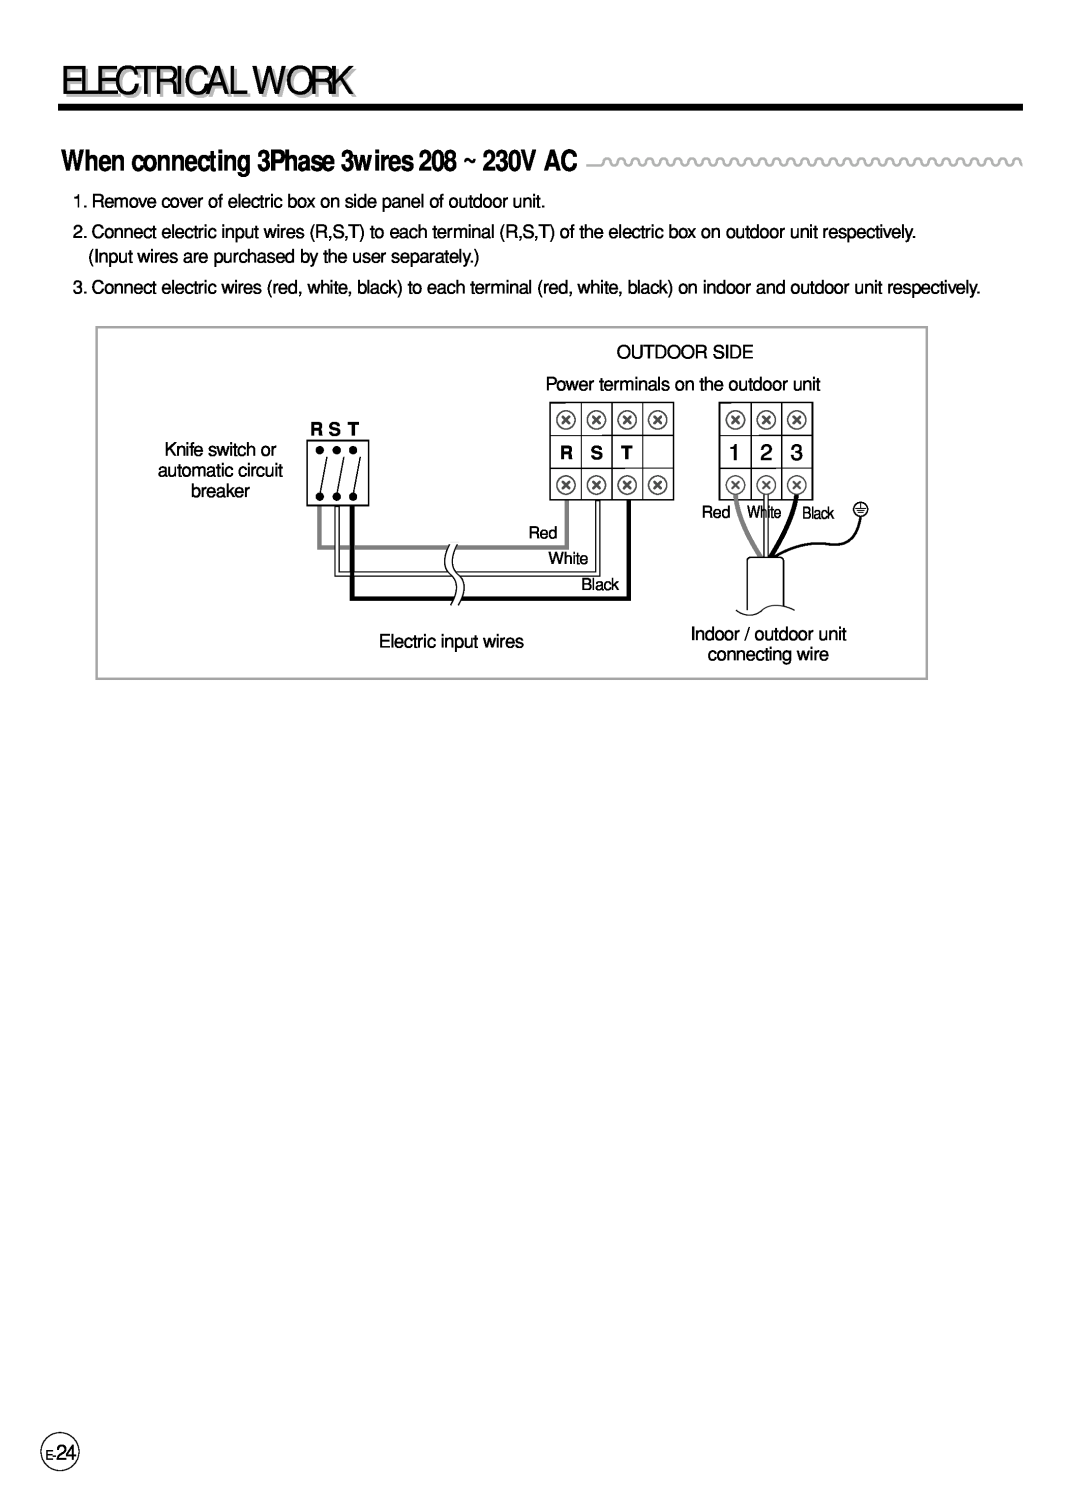 Samsung AP500PF installation manual Electricali Work, When connecting 3Phase 3wires 208 ~ 230V AC 